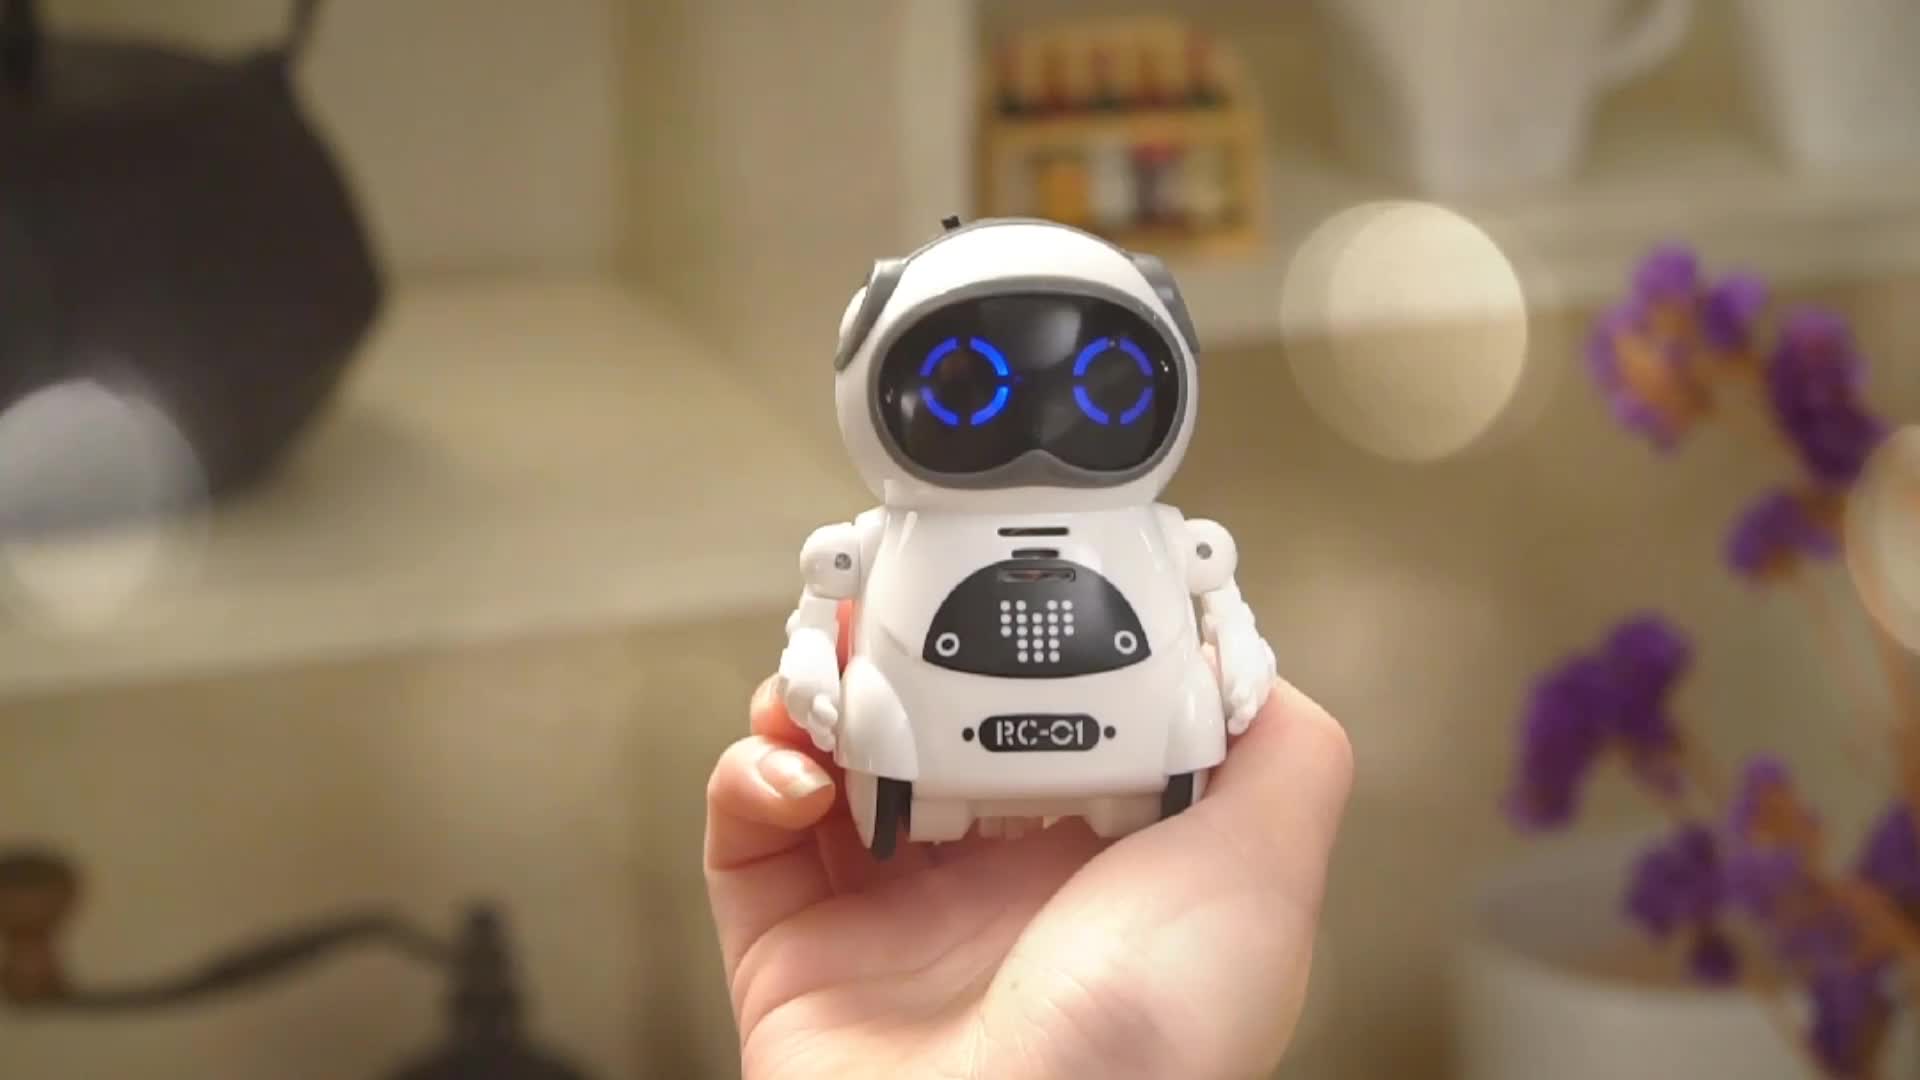 Electric Smart Robot That Can Sing And Dance For Children - Temu